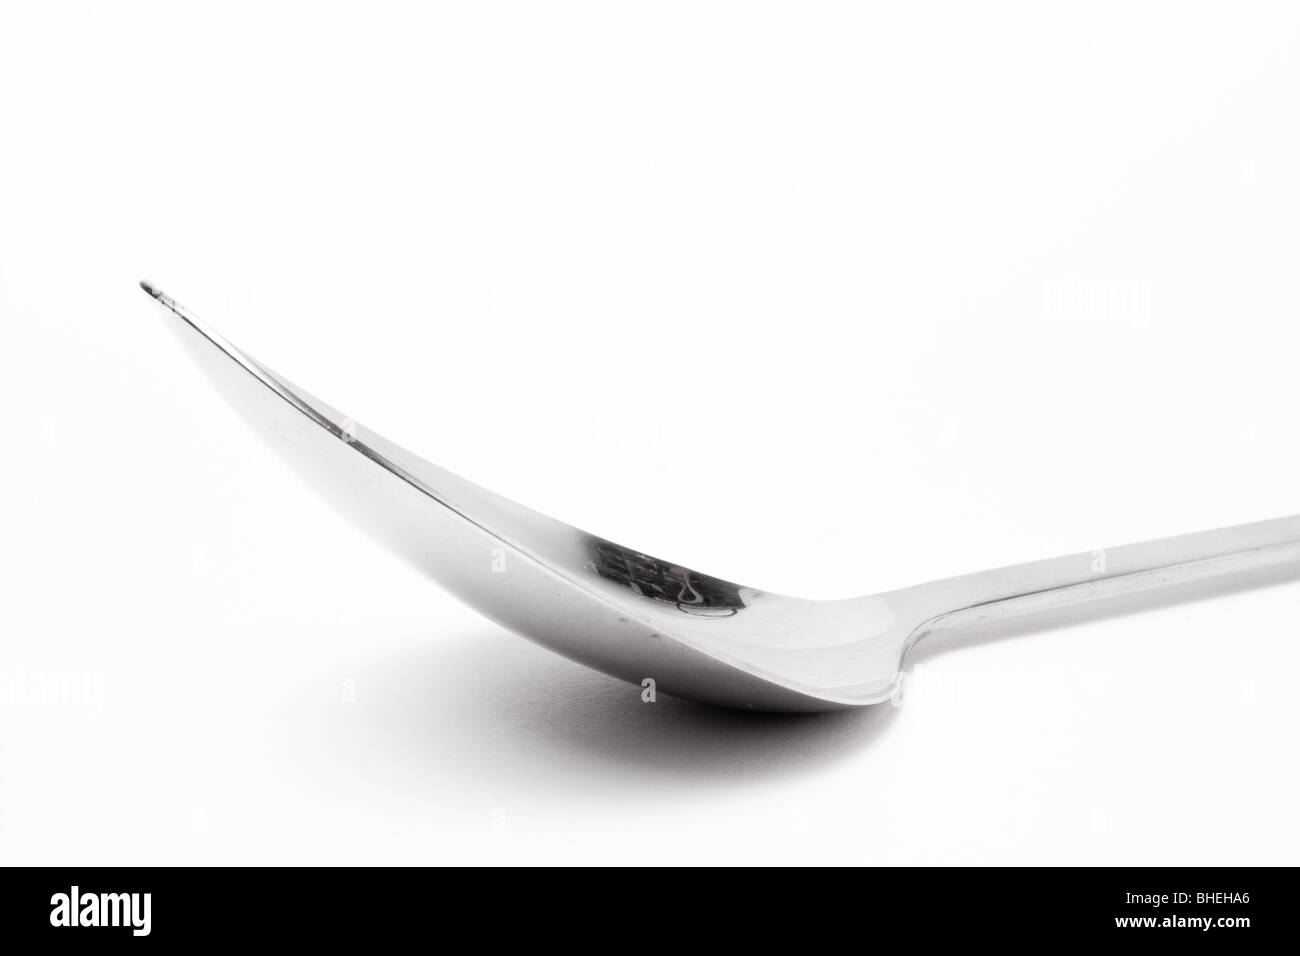 Large Stainless steel Kitchen spoon isolated against white background. Stock Photo